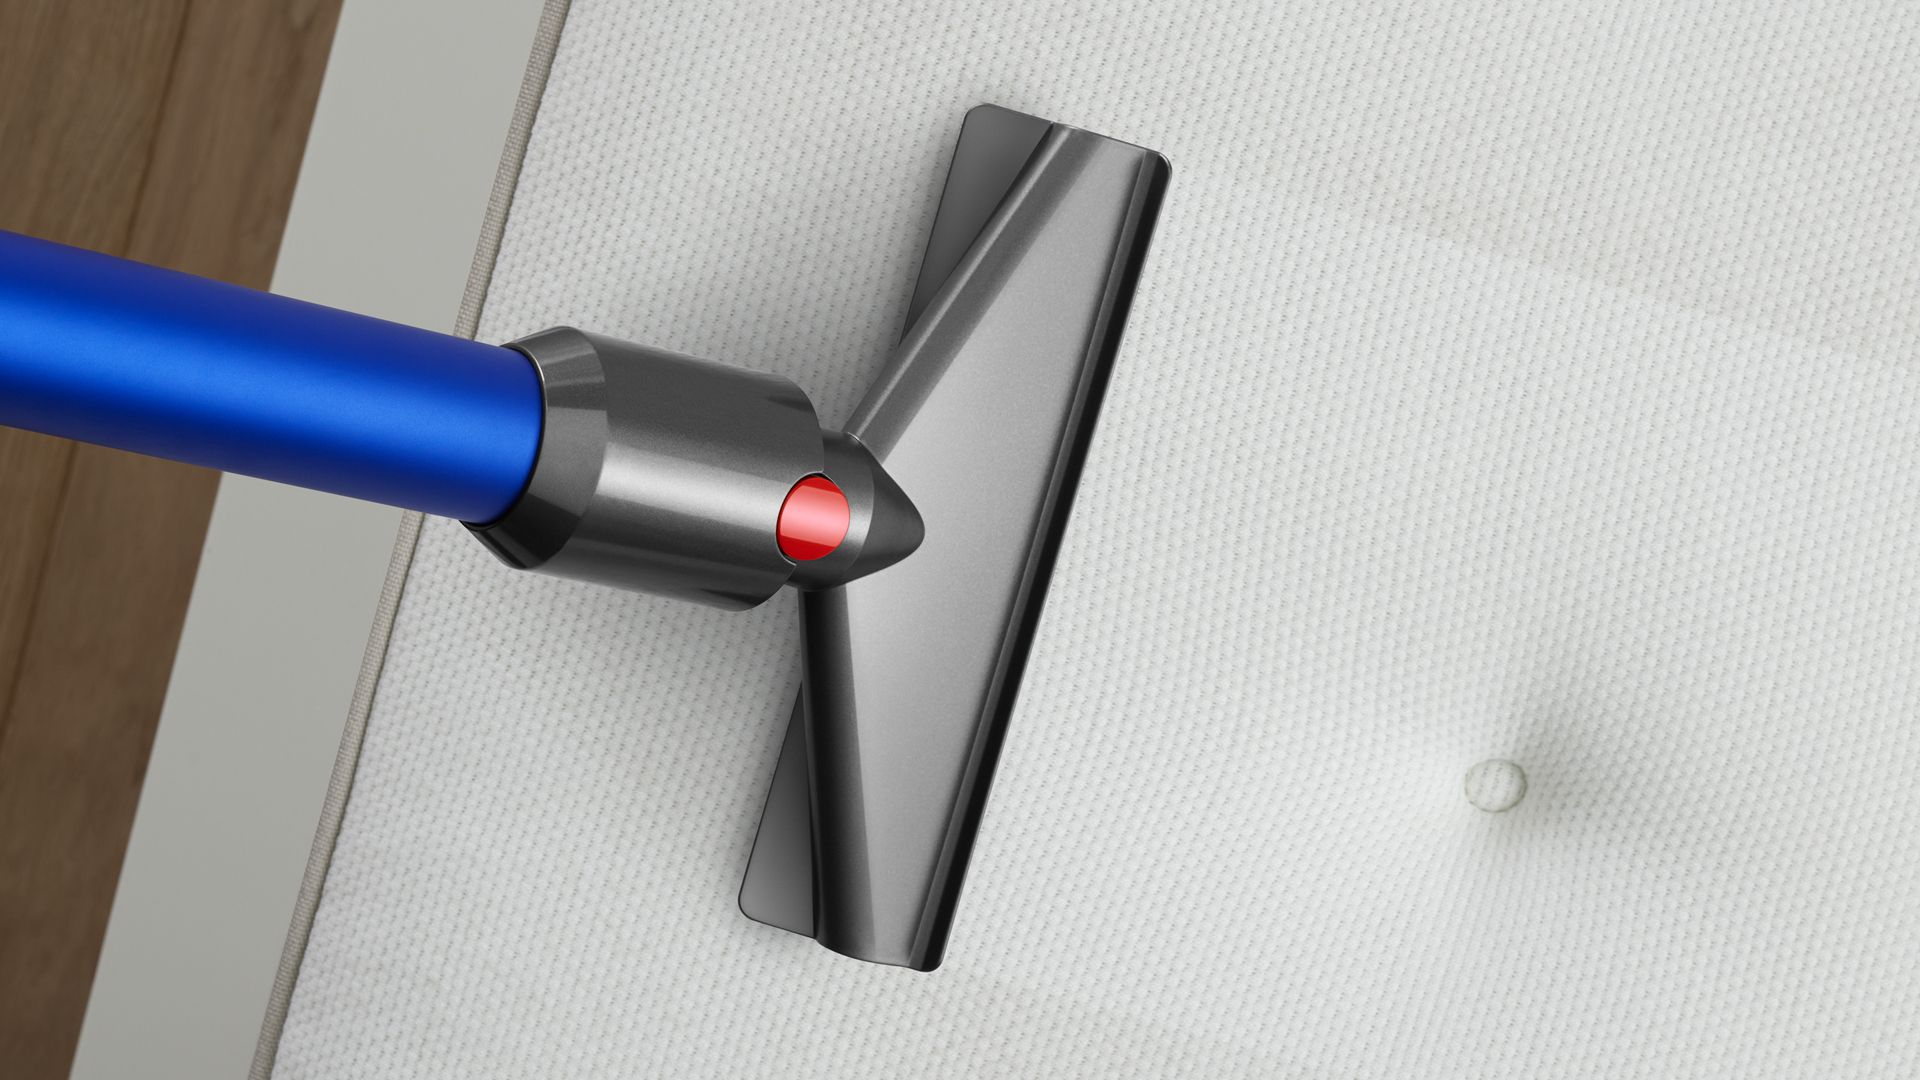 dyson quick release mattress tool review